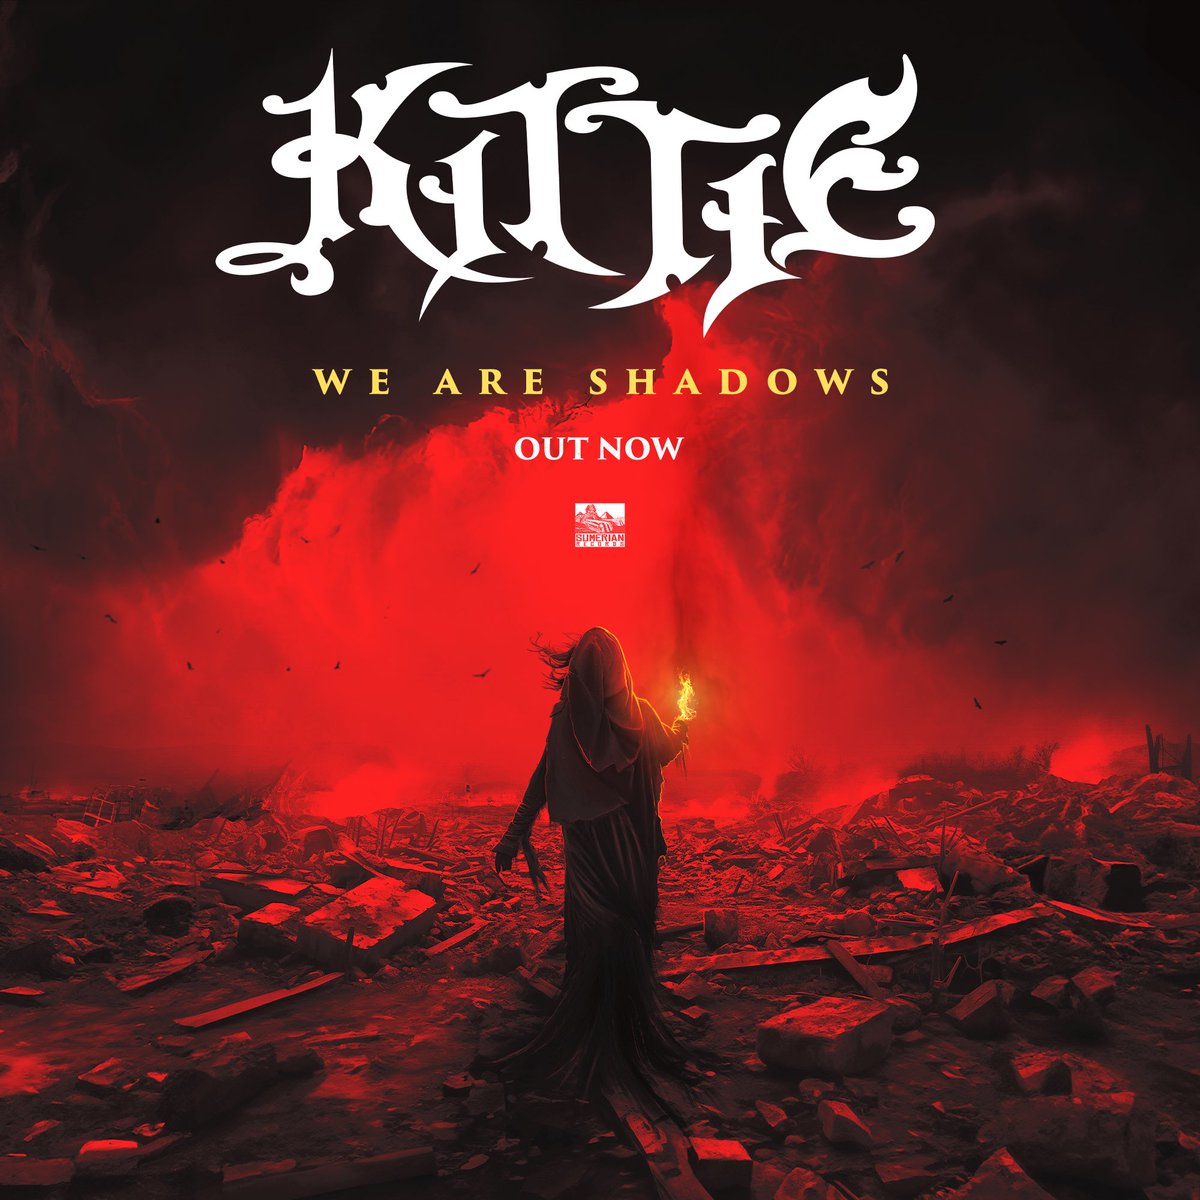 The wait is over! @OFFICIALKITTIE is back with ‘We Are Shadows’ now streaming on all platforms 🐱🎸Check out the new video on @SumerianRecords YouTube channel and show the queens of metal some love 🖤 youtube.com/watch?v=wtxGVI…